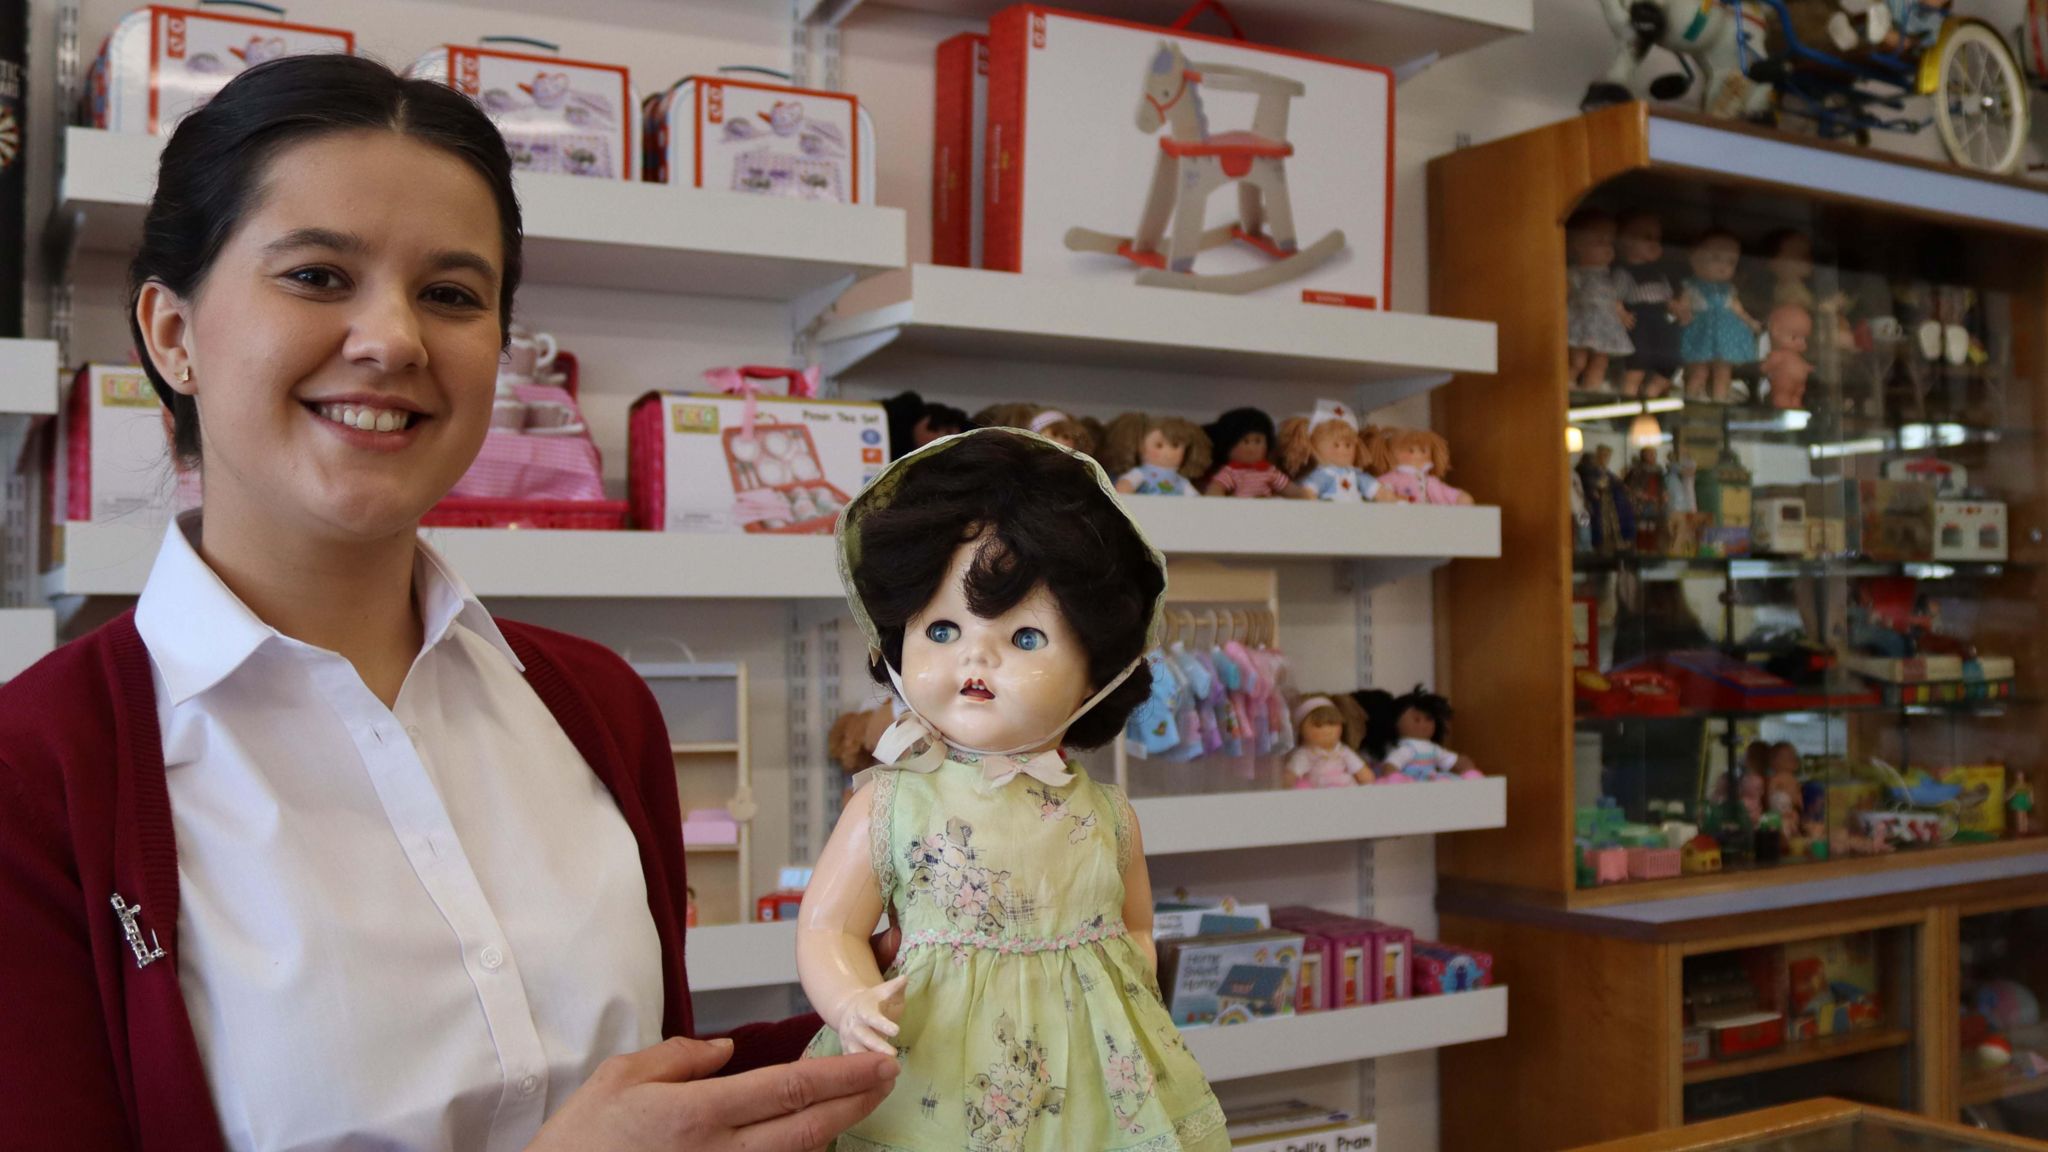 A woman in a red cardigan holds a vintage doll in a yellow dress in front of toy displays